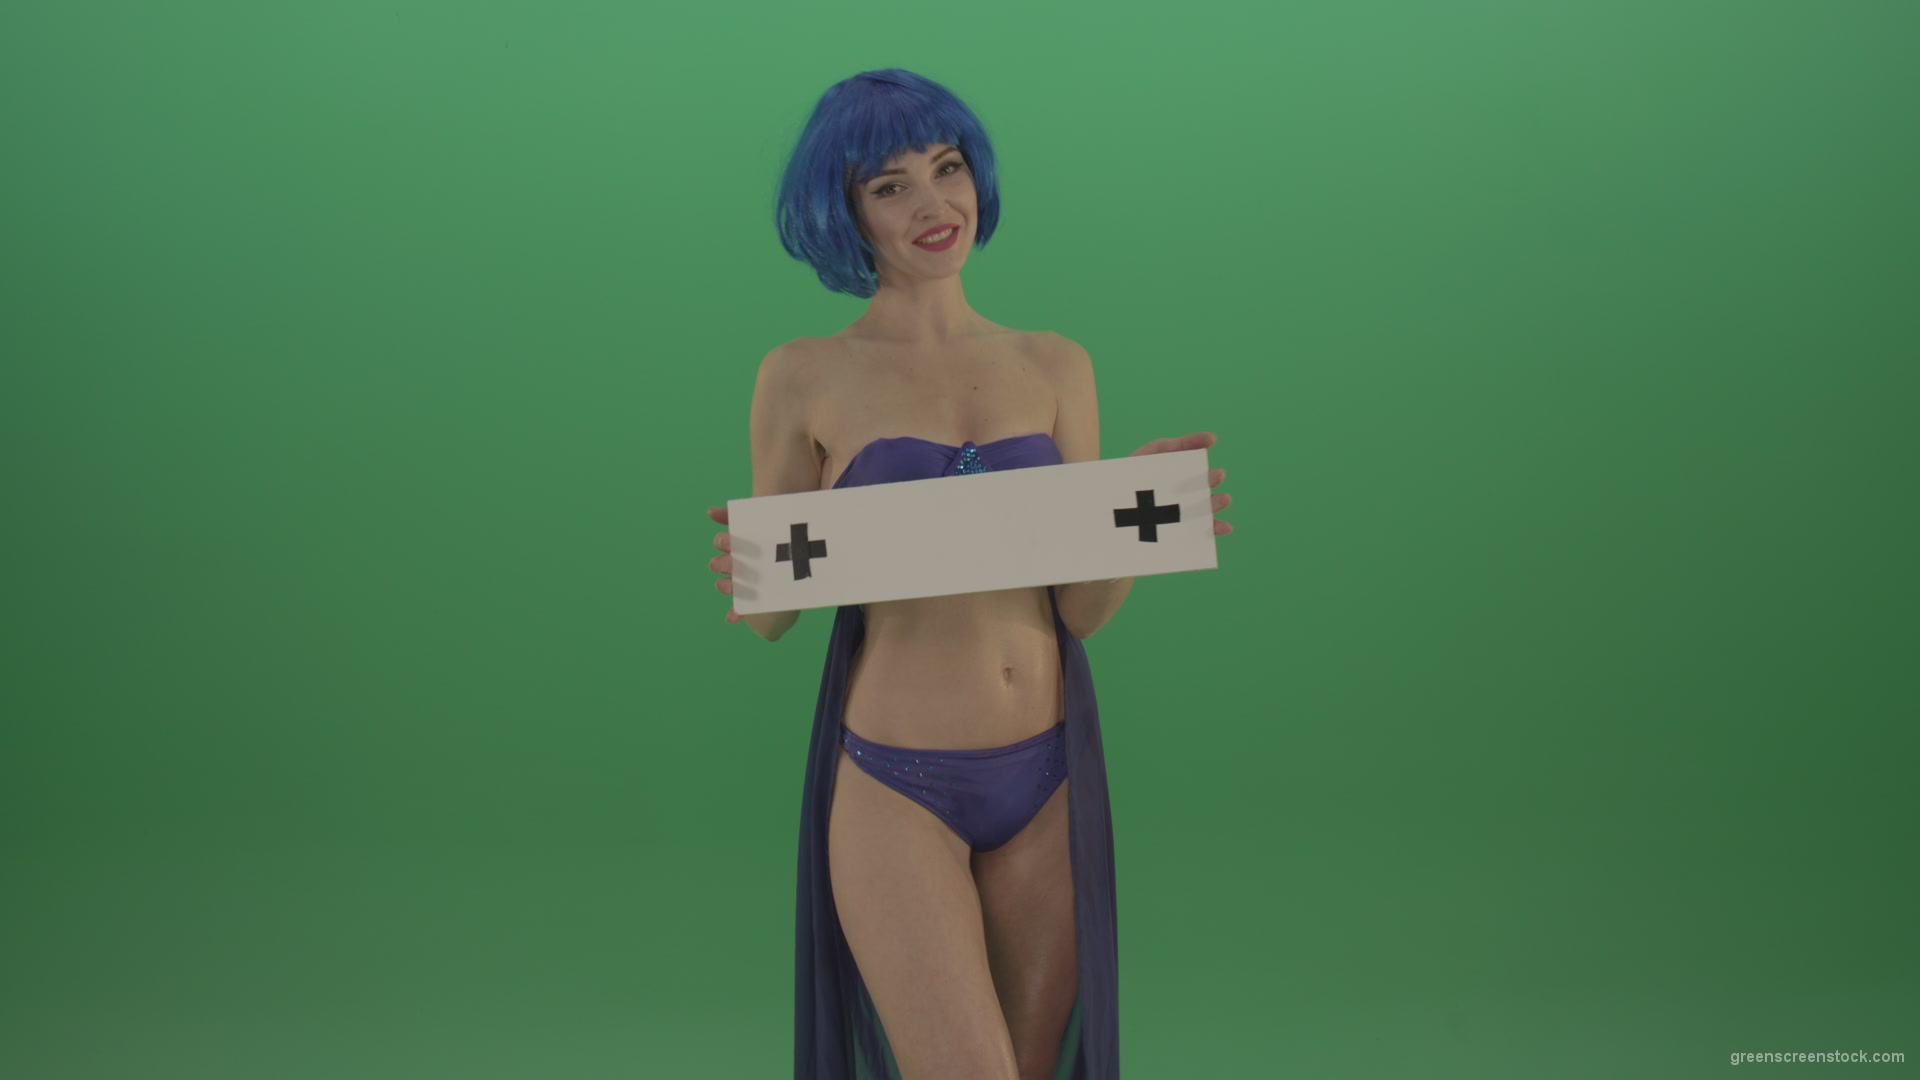 Blue-hair-elegant-naked-girl-posing-with-text-mockup-template-plane-on-green-screen_008 Green Screen Stock